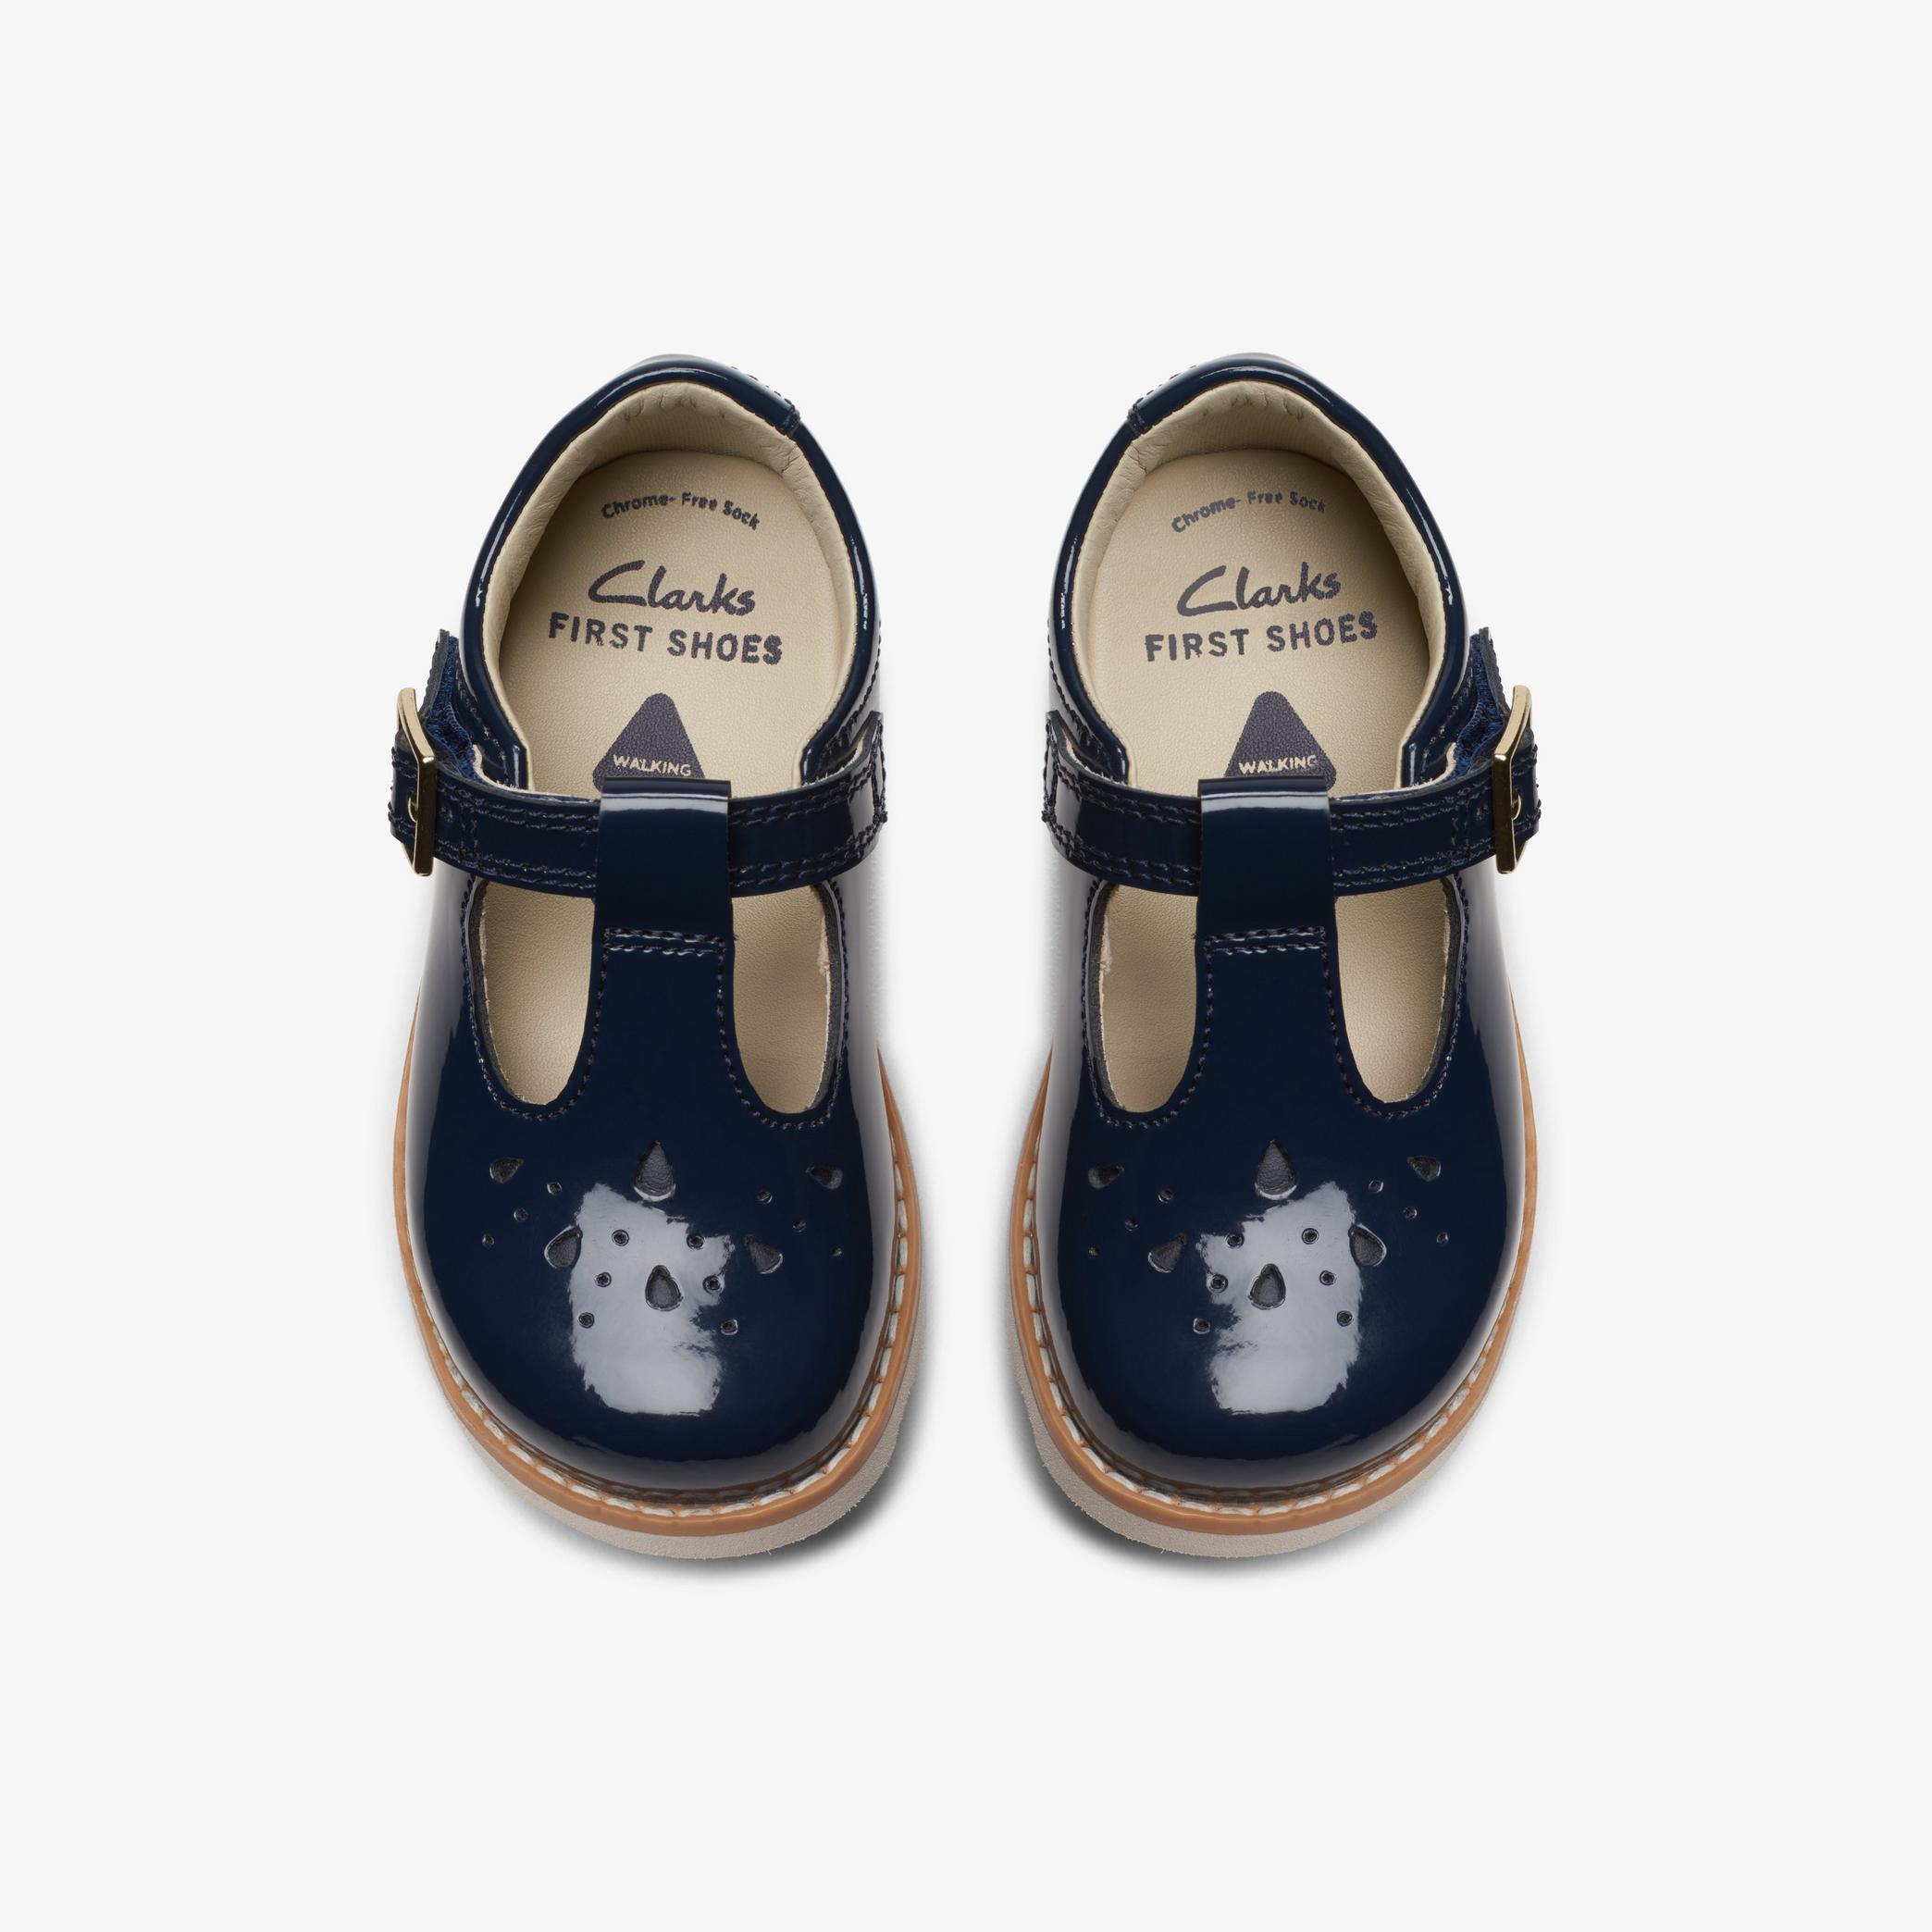 Crown Print Toddler Navy Patent T Bar Shoes, view 6 of 6